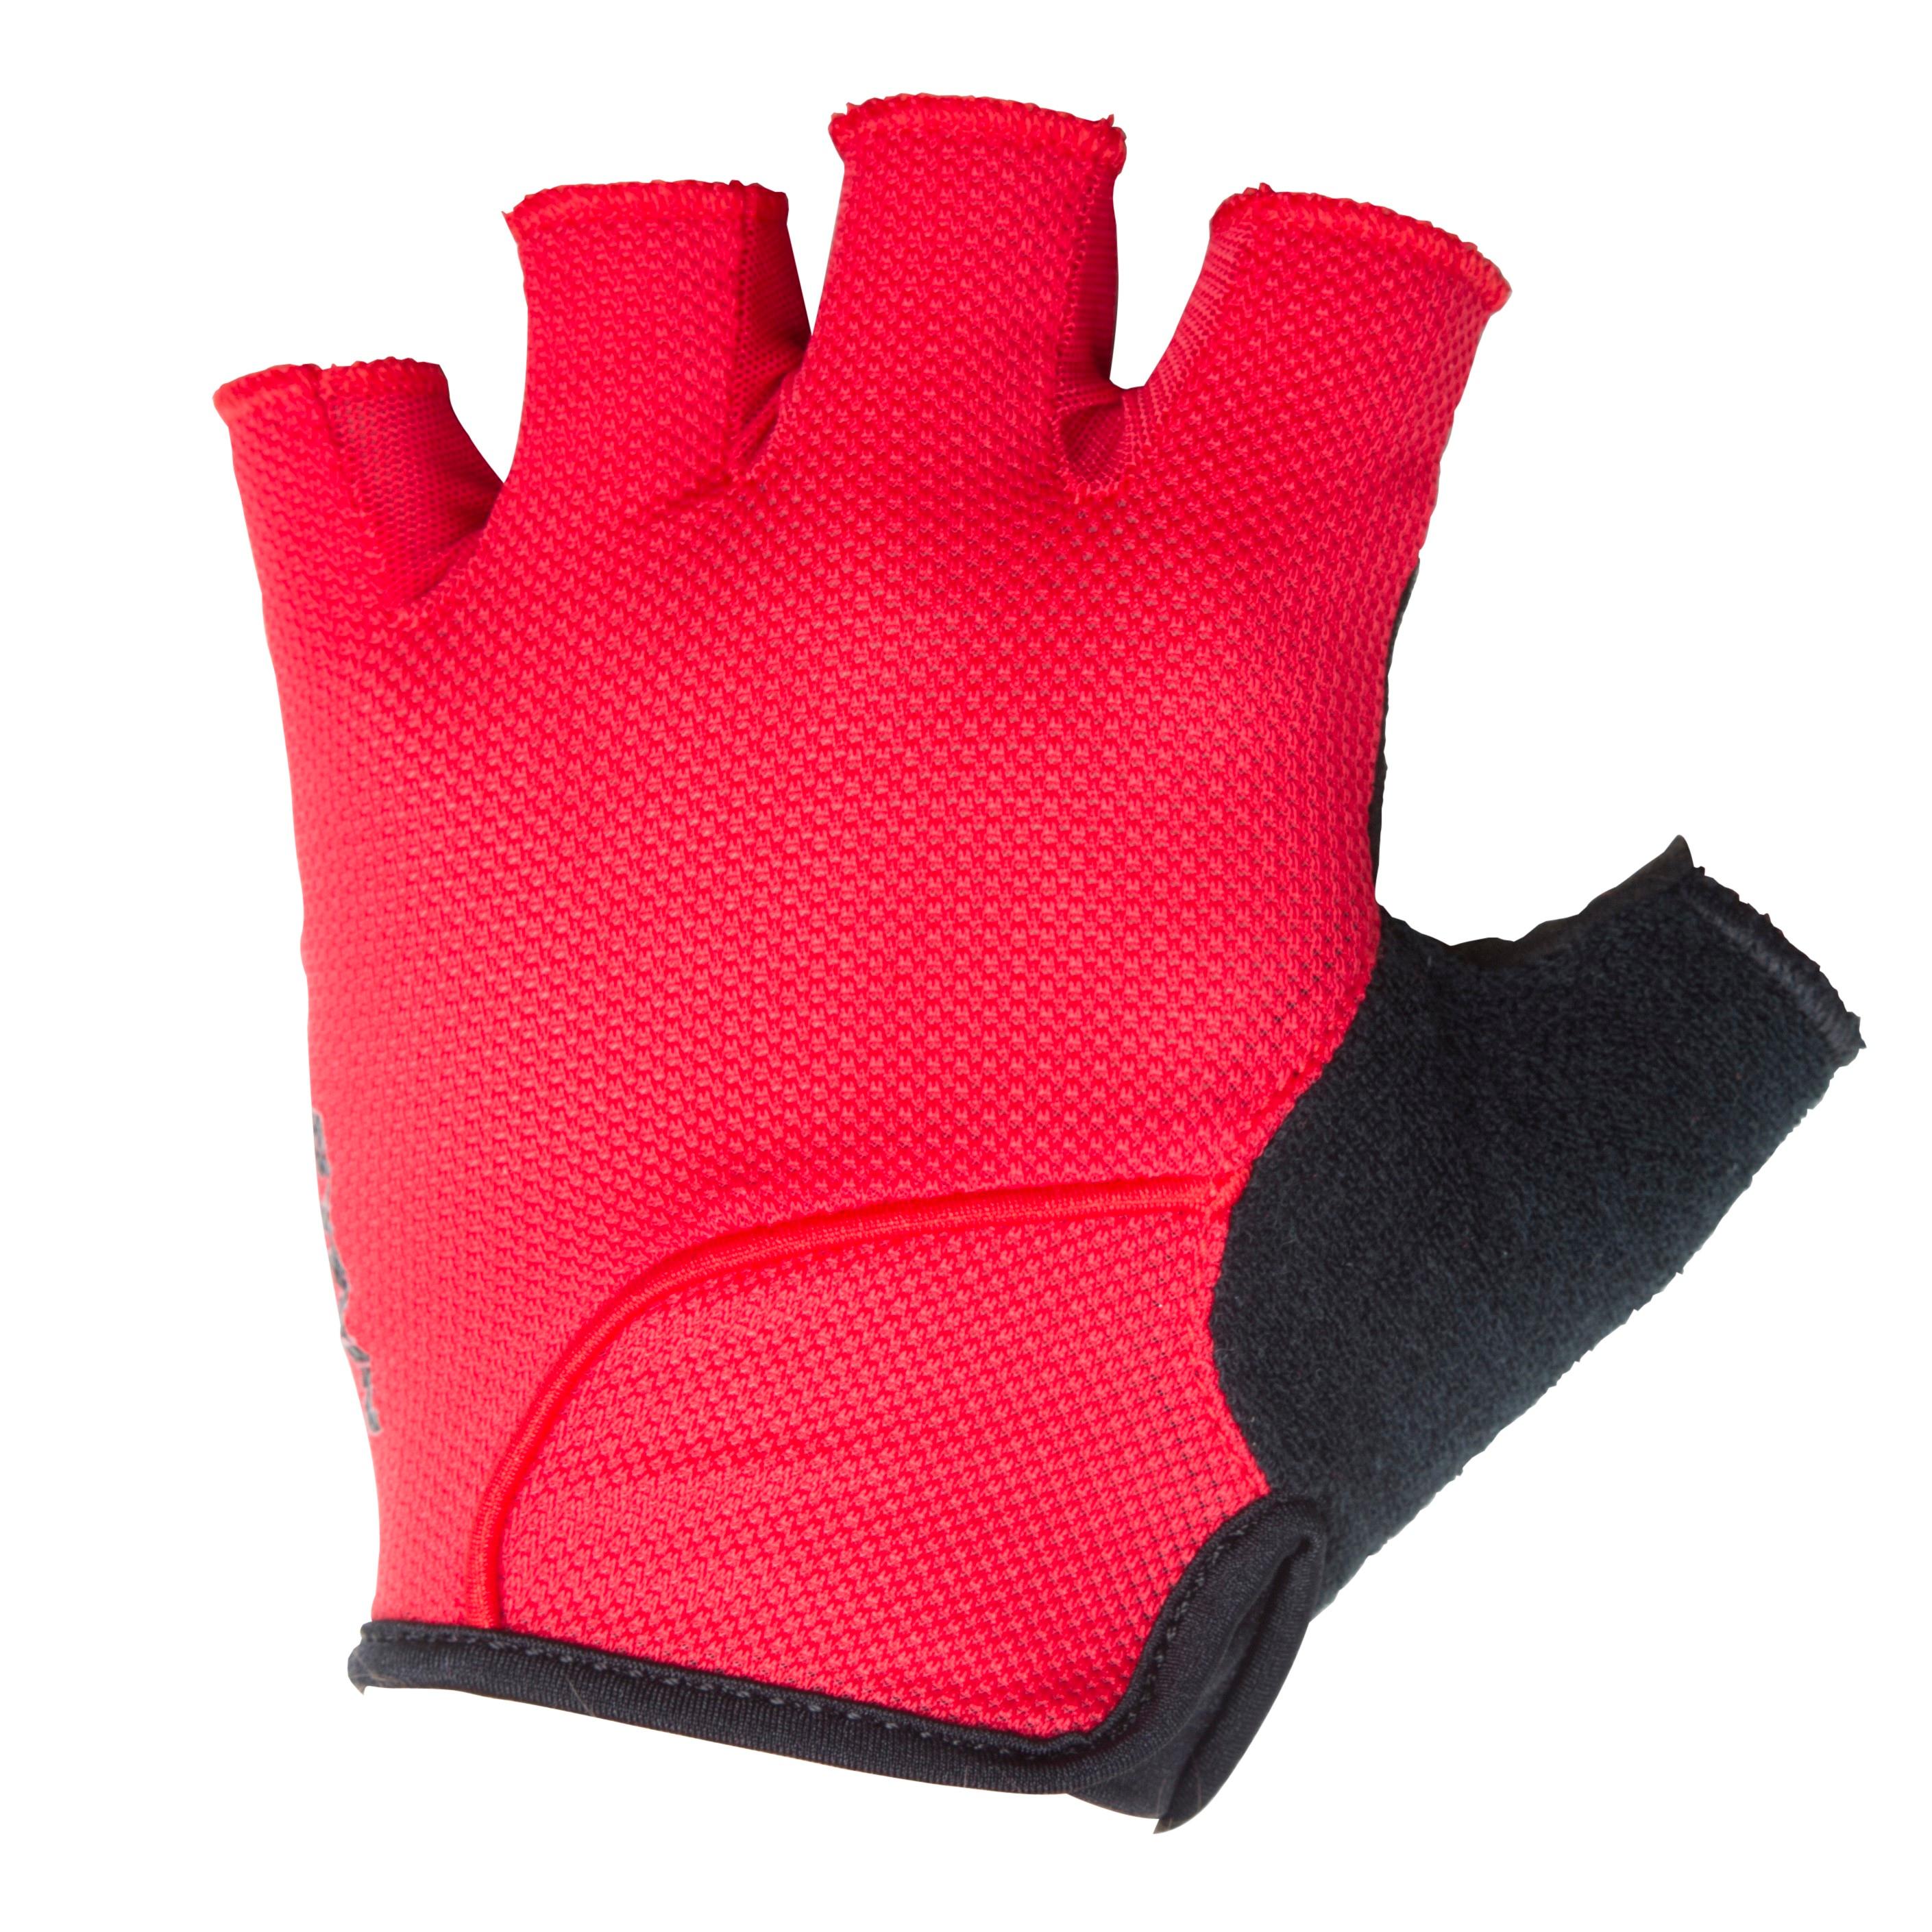 TRIBAN 500 Cycling Gloves - Red